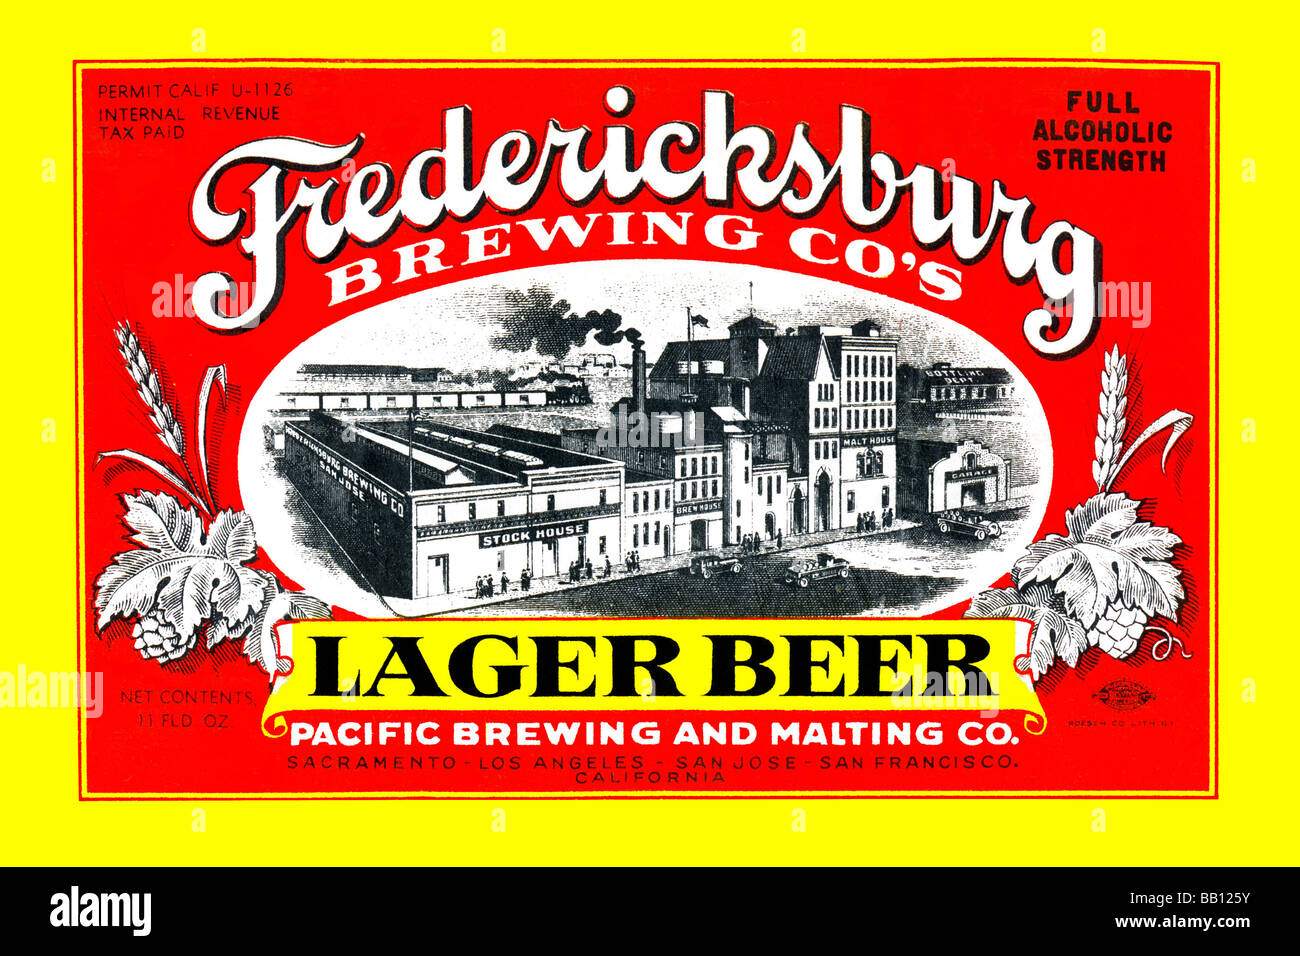 Fredericksburg Brewing Co.'s Lager Beer Stock Photo